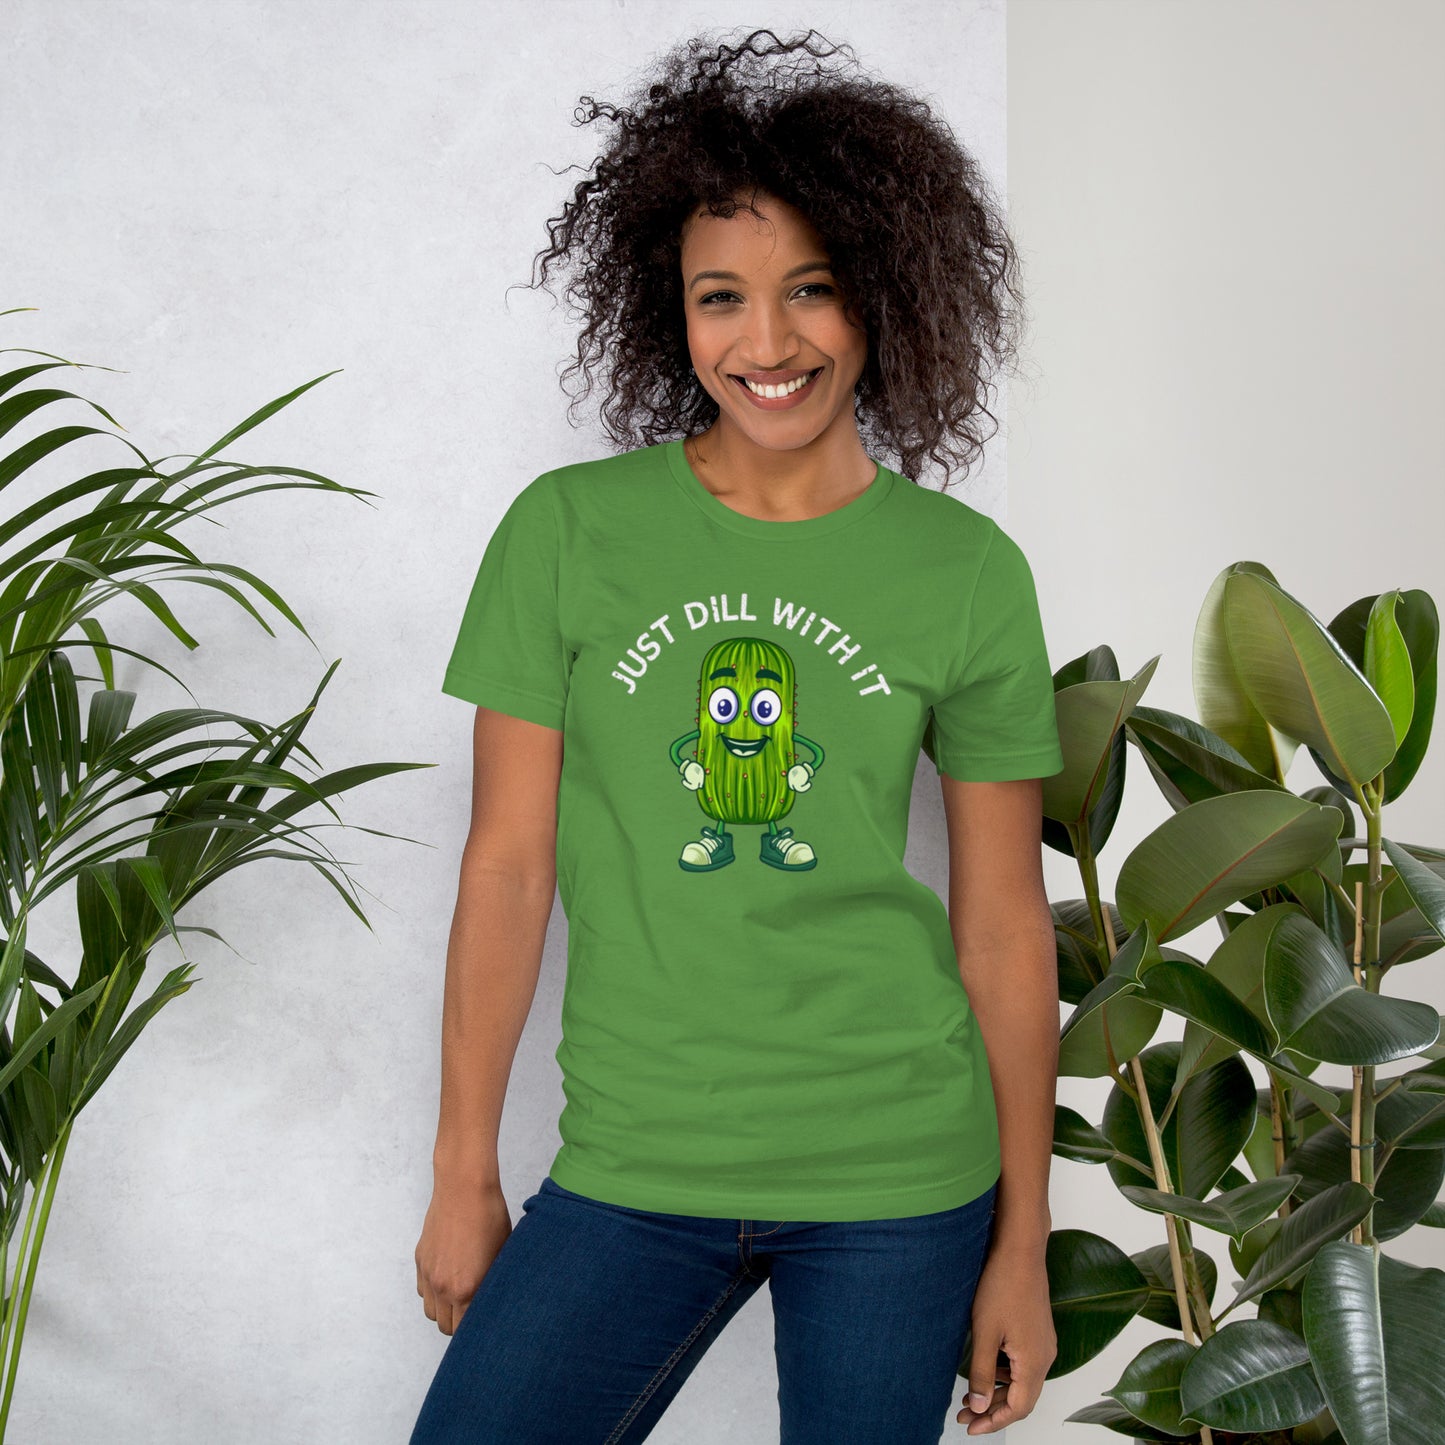 Just Dill With It Unisex t-shirt